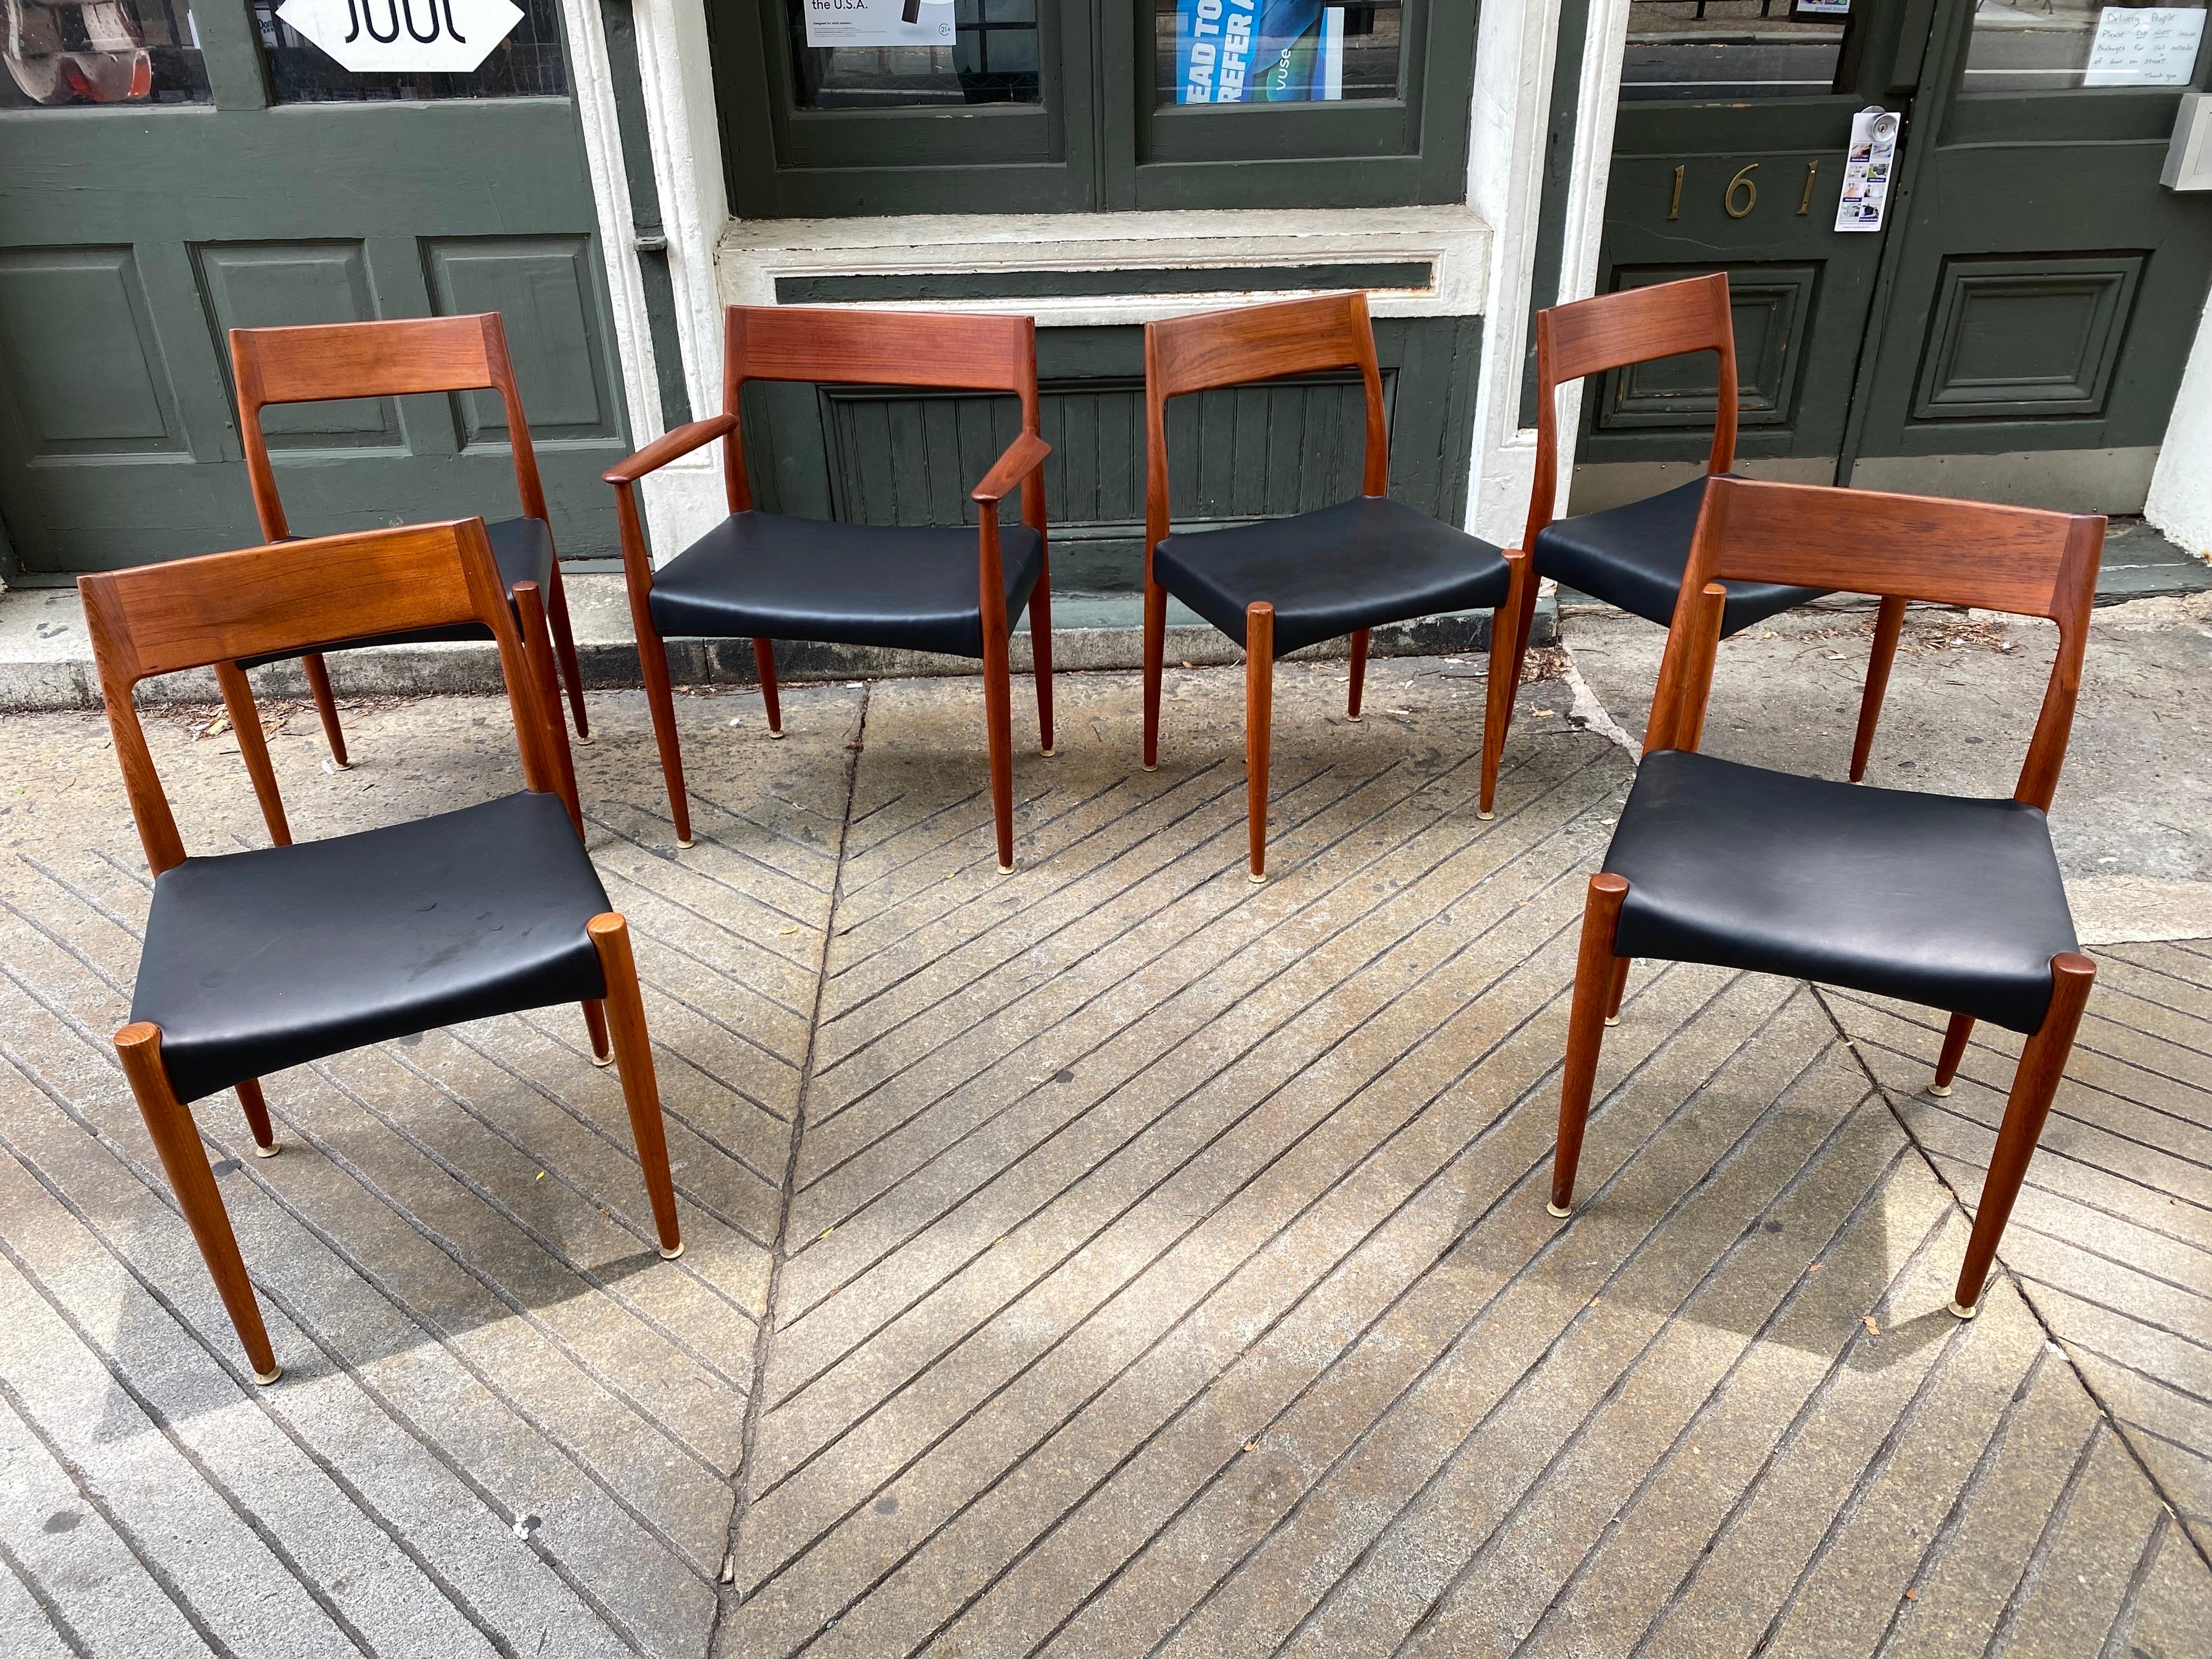 Set of 6 Arne Hovmand-Olsen Teak Dining Chairs with new leather and foam seats.  One Armchair and 5 Armless.  Beautiful simple elegant design, very lightweight but very solid.  Armchair measures 25